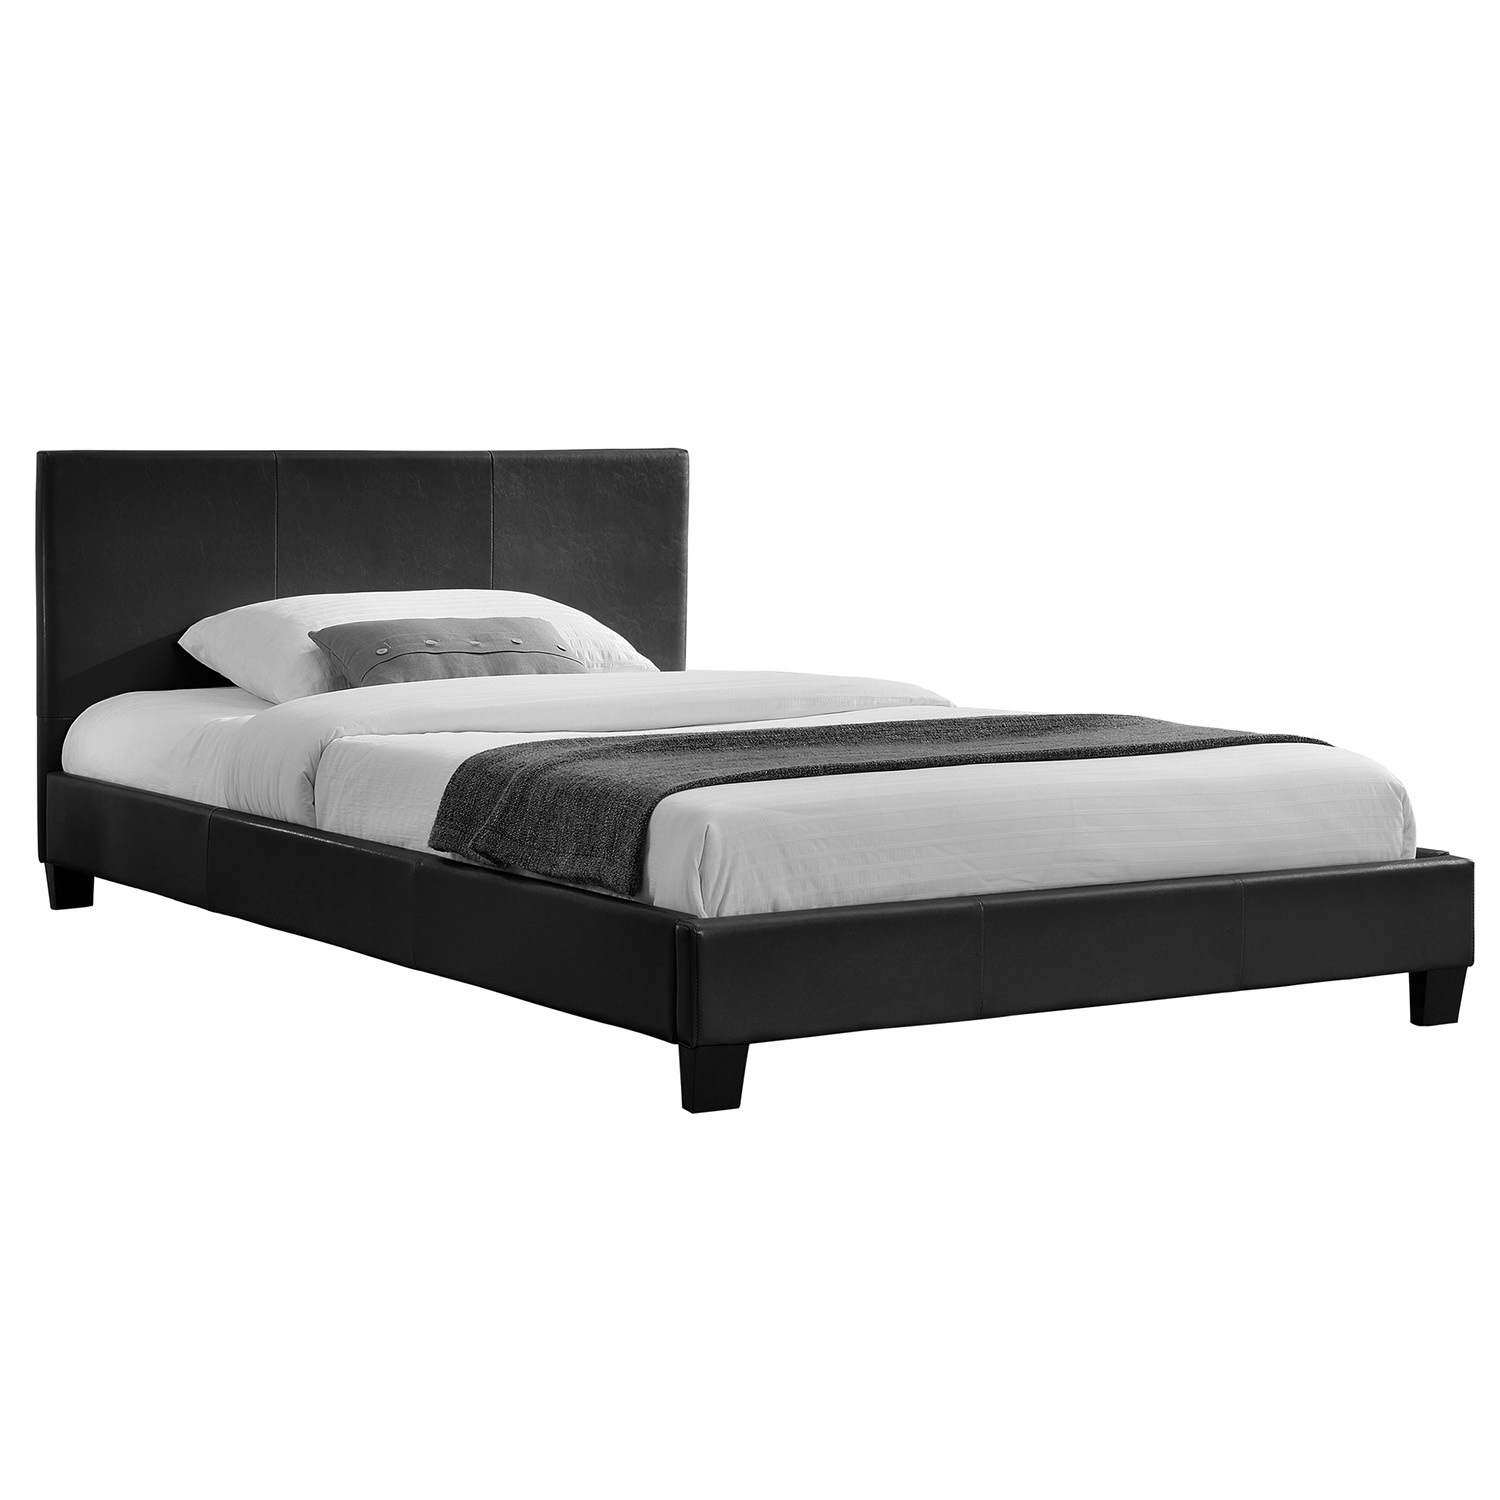 Black Makoto Faux Leather Bed Frame, Black And White Leather Bed